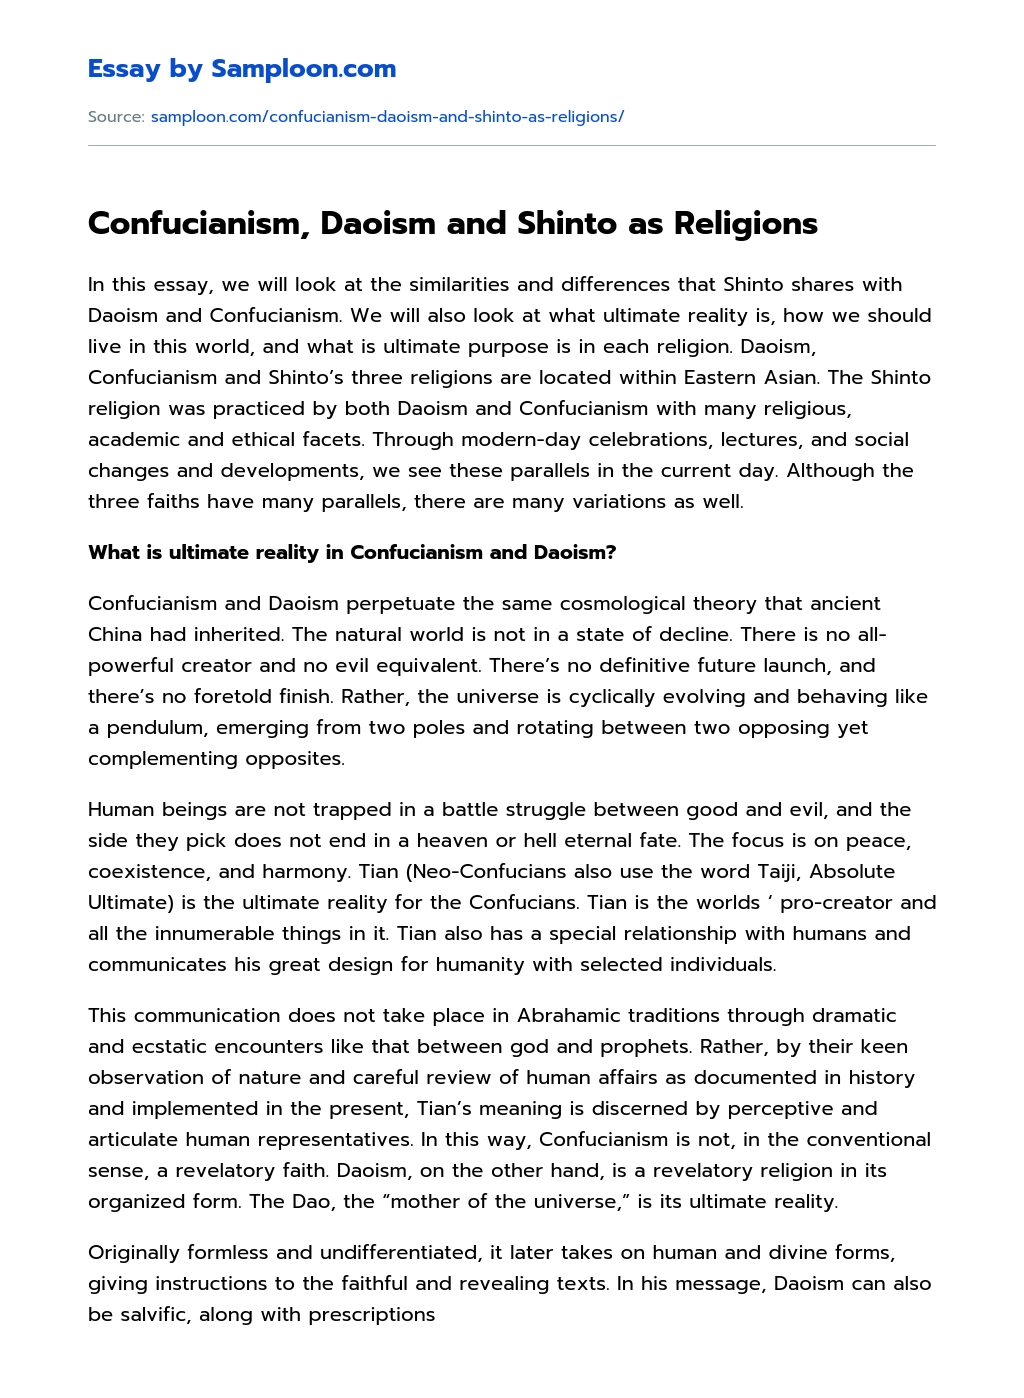 Confucianism, Daoism and Shinto as Religions essay